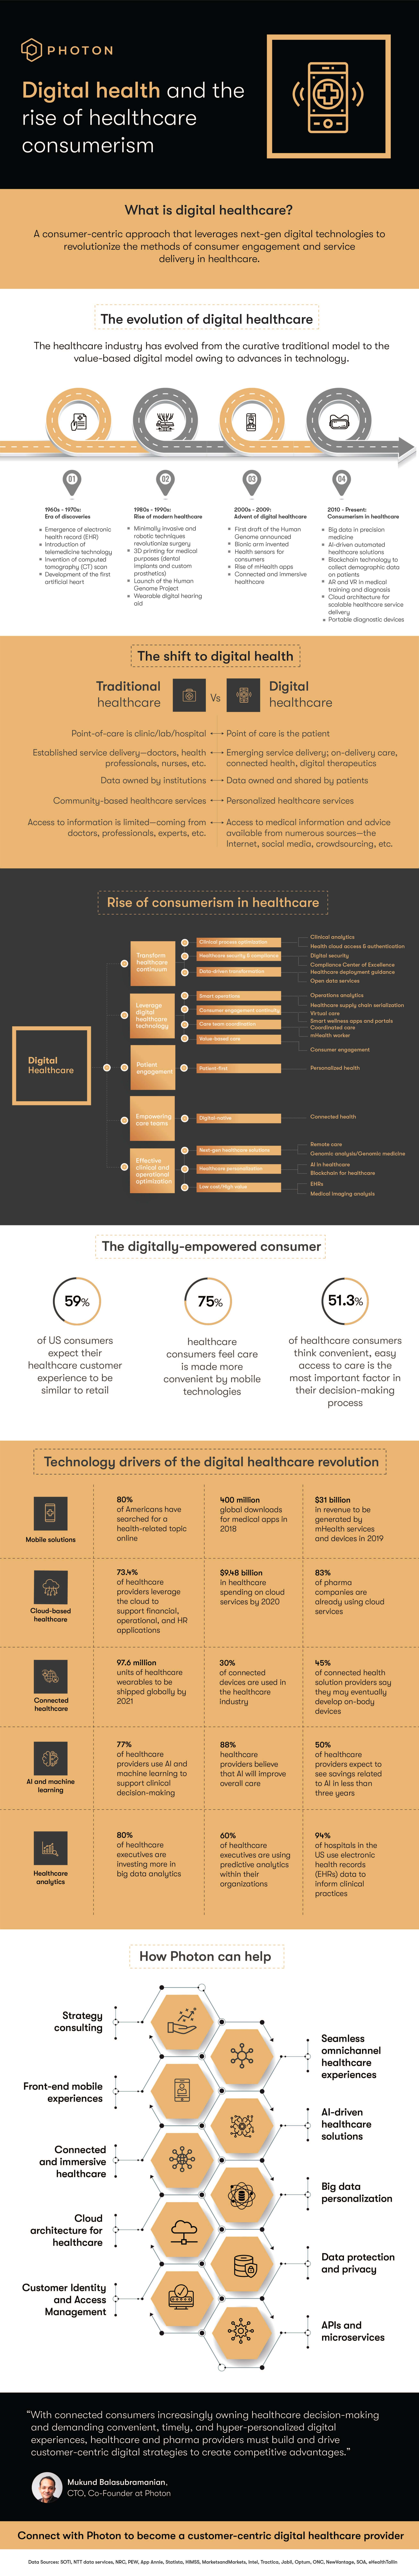 The rise of digital healthcare and consumerism